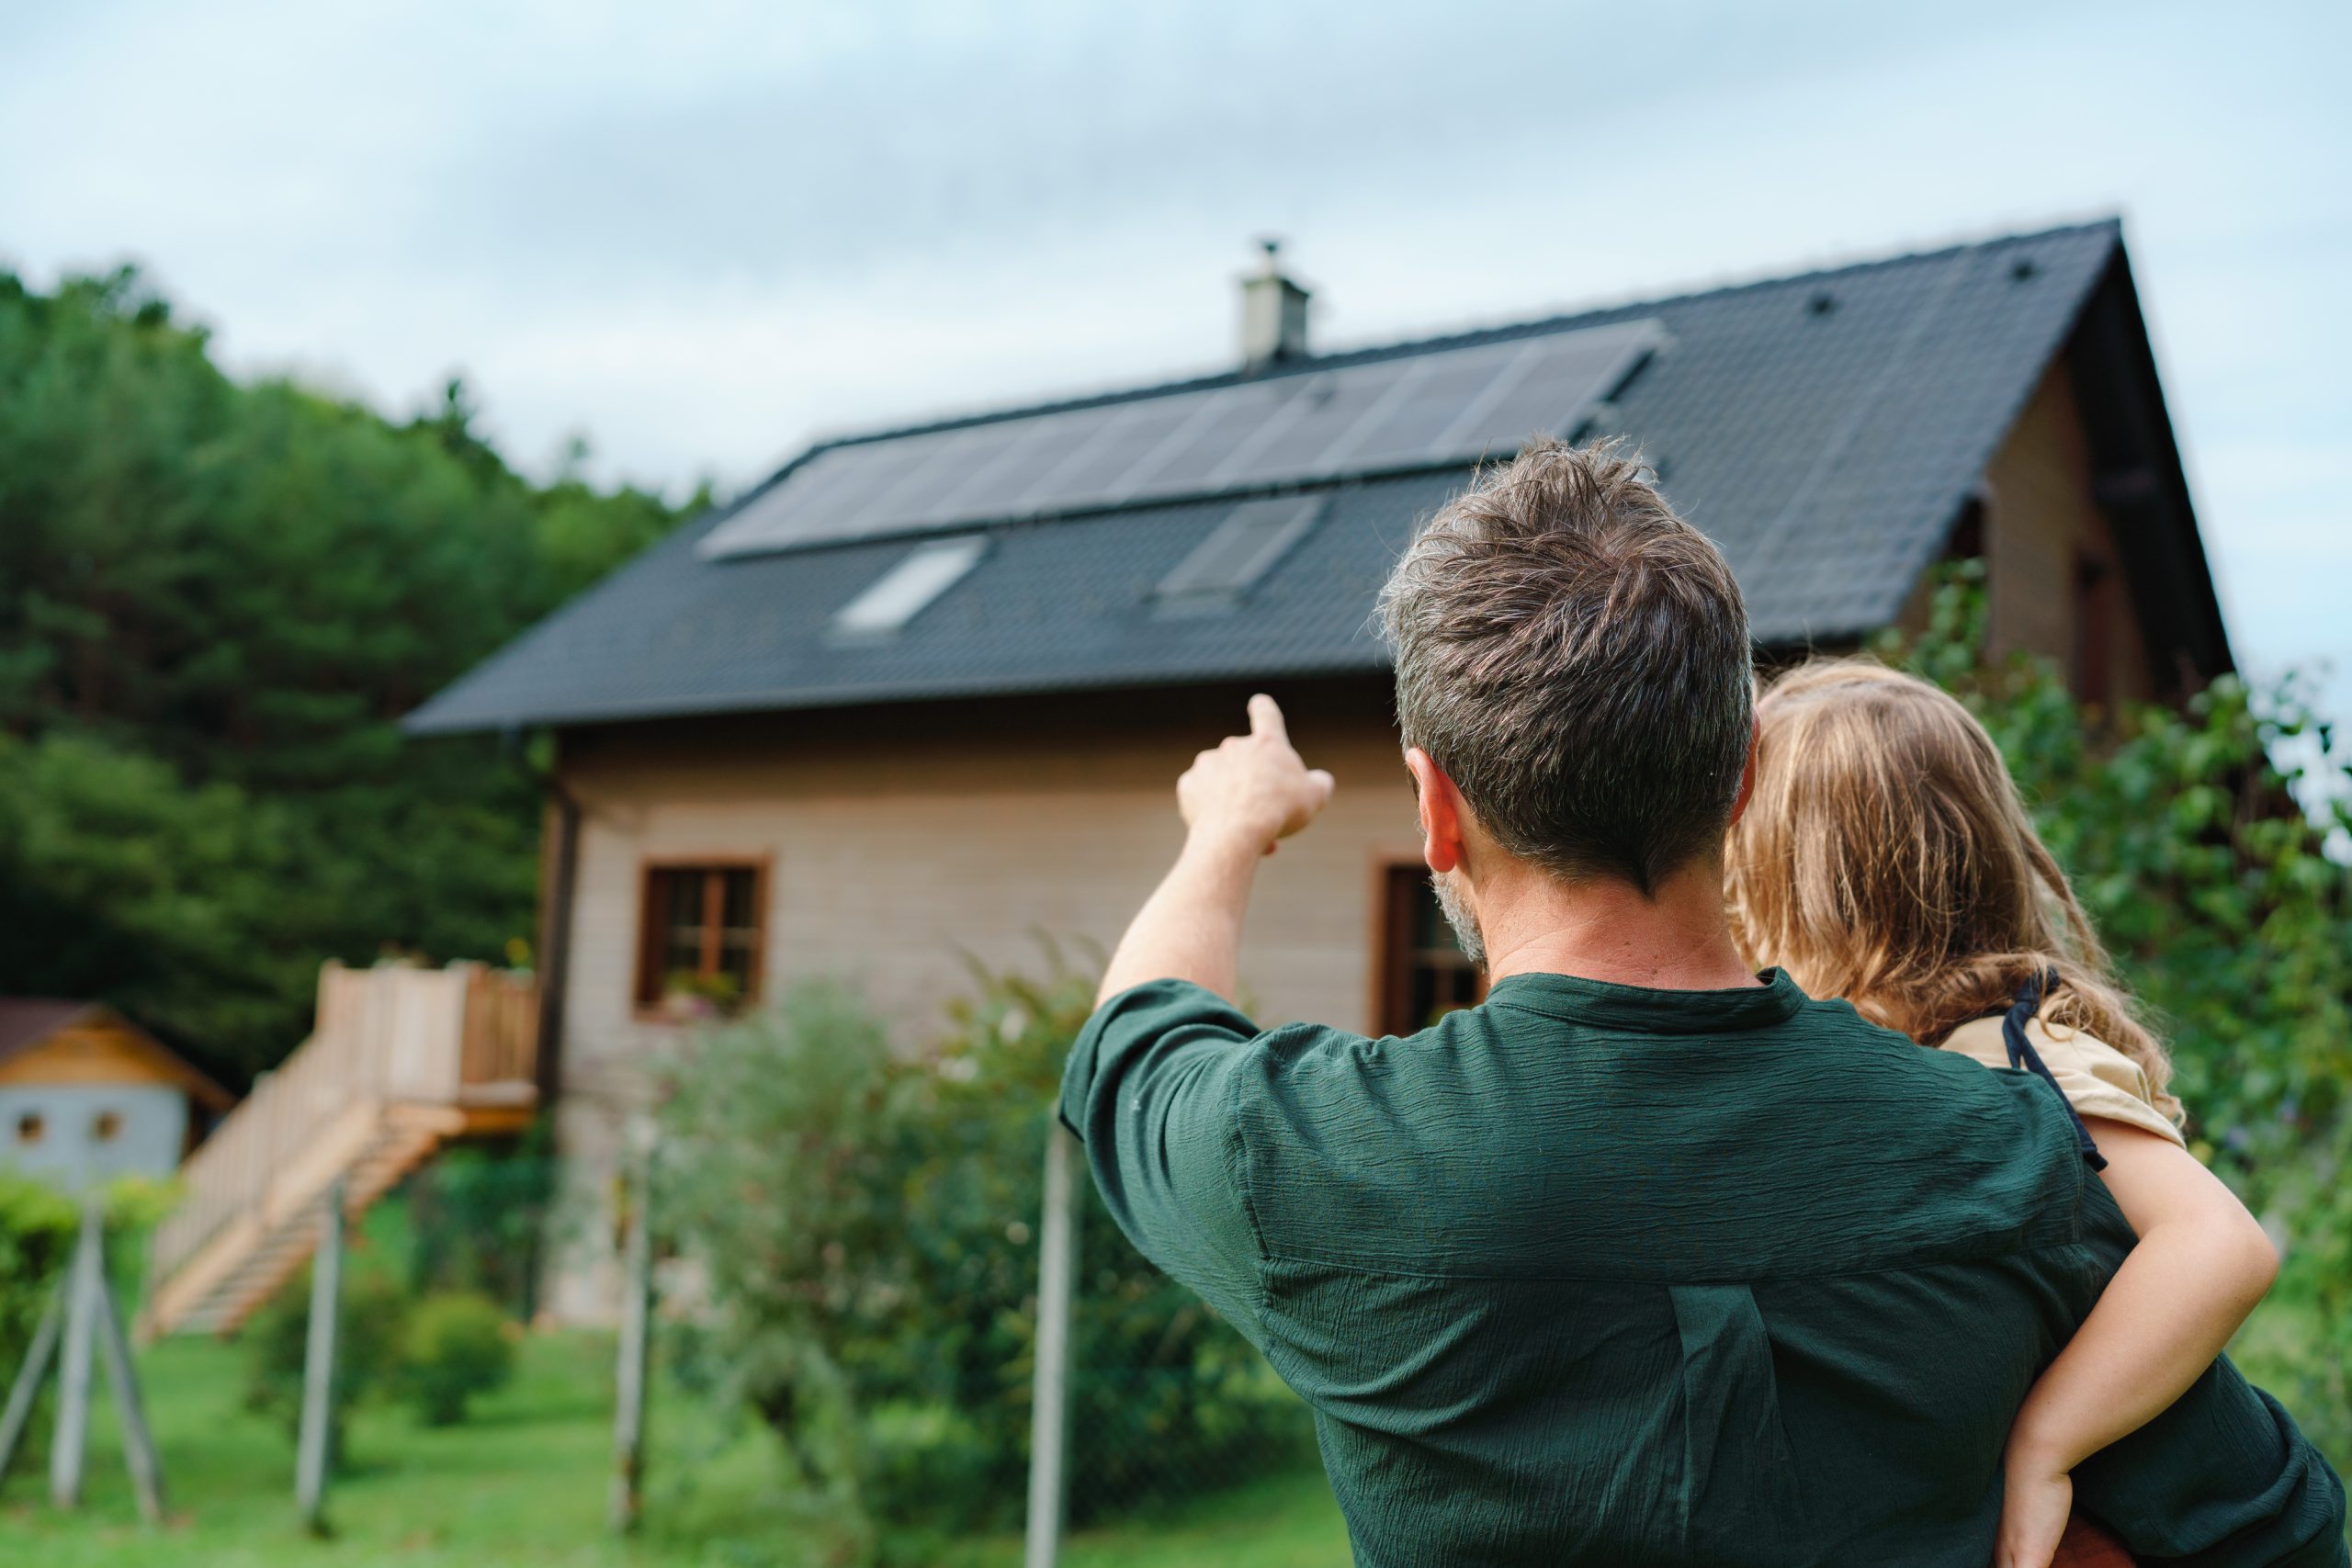 dad holding child pointing at a house with solar panels